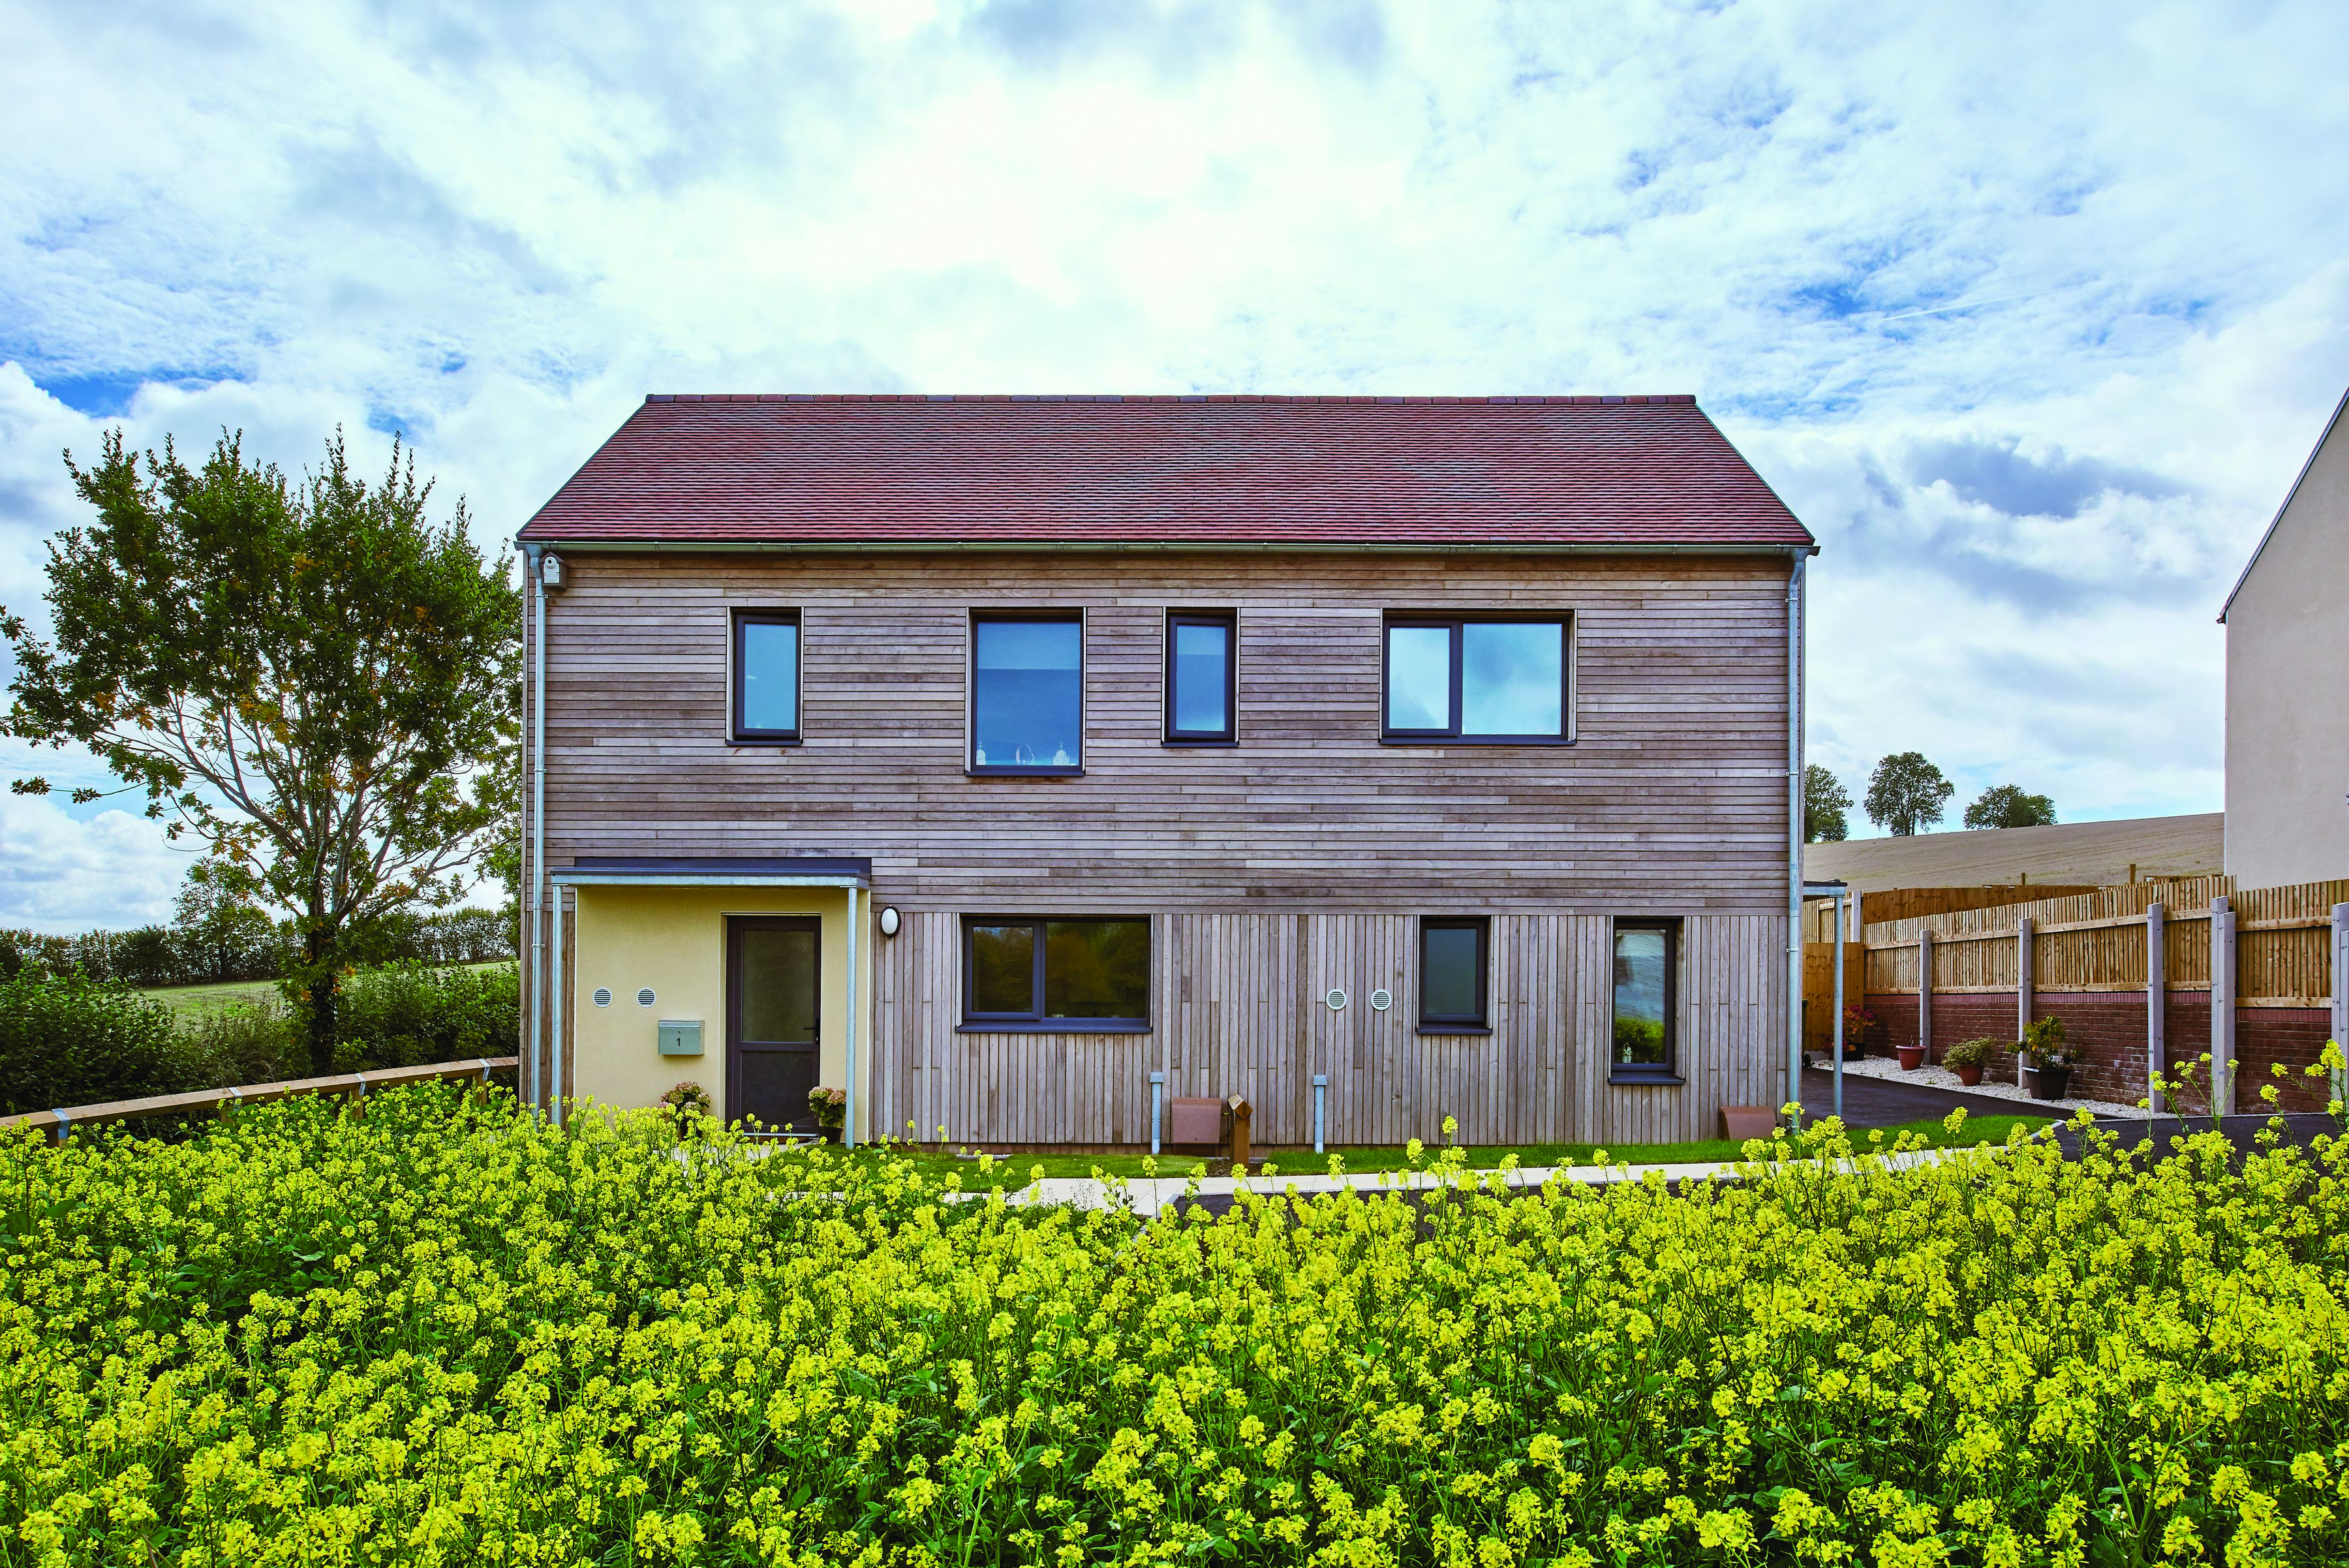 One of the energy efficient homes at the Architype’s Callaughtons Ash scheme for South Shropshire Housing Association. Image credit ©Richard Kieley 2018